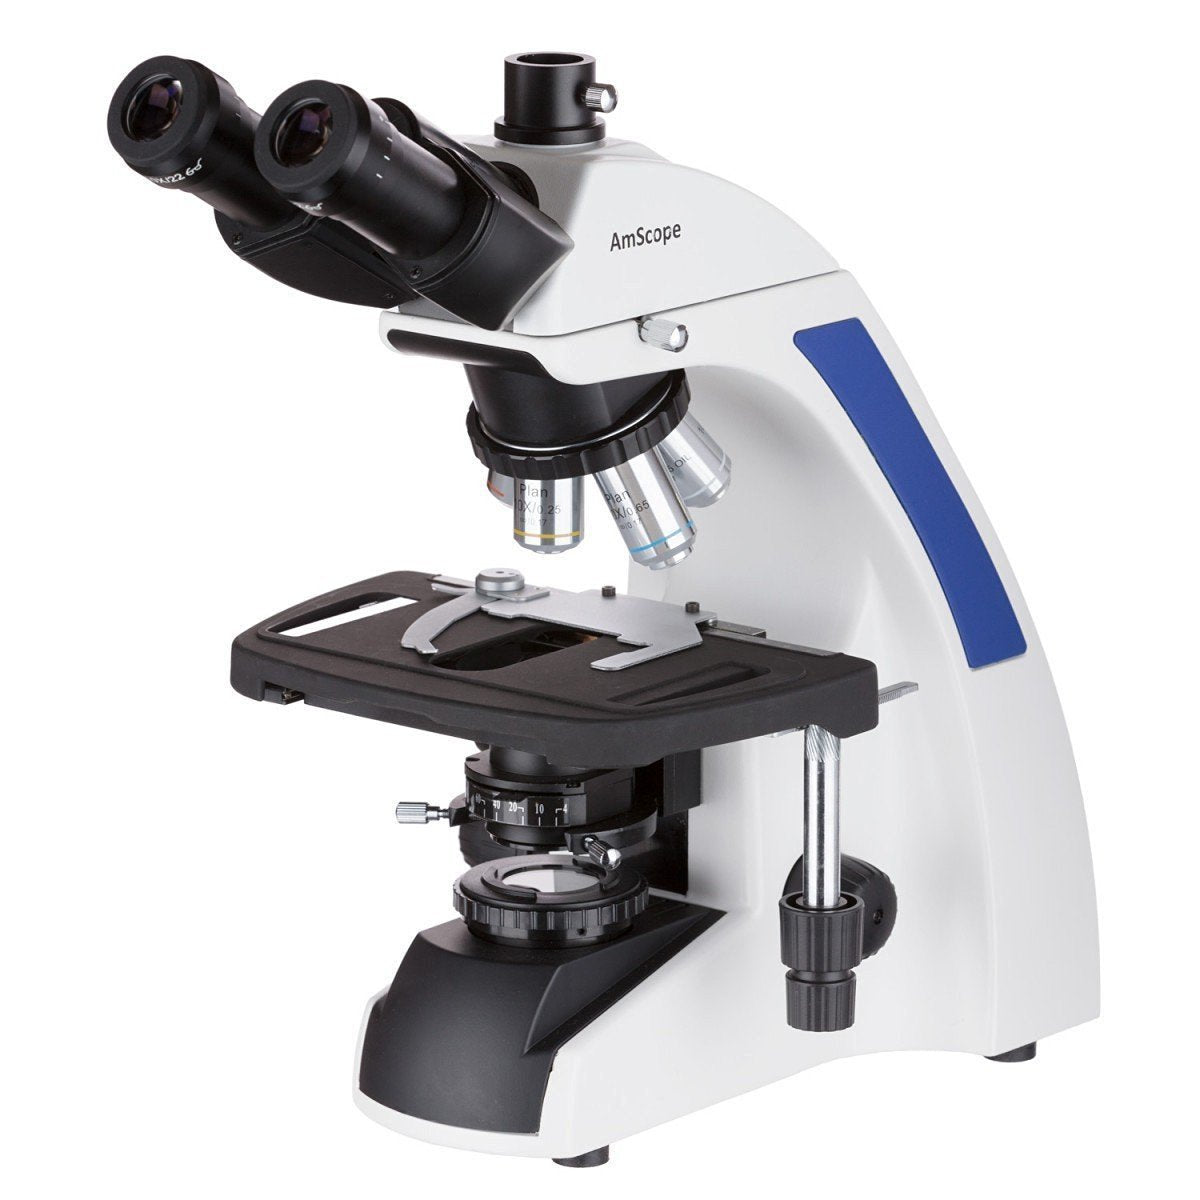 MM-200 digital microscope is equipped with 2 LCD screen, white LED lights  and UV light, and rechargeable battery, which makes it a very useful field  microscope.